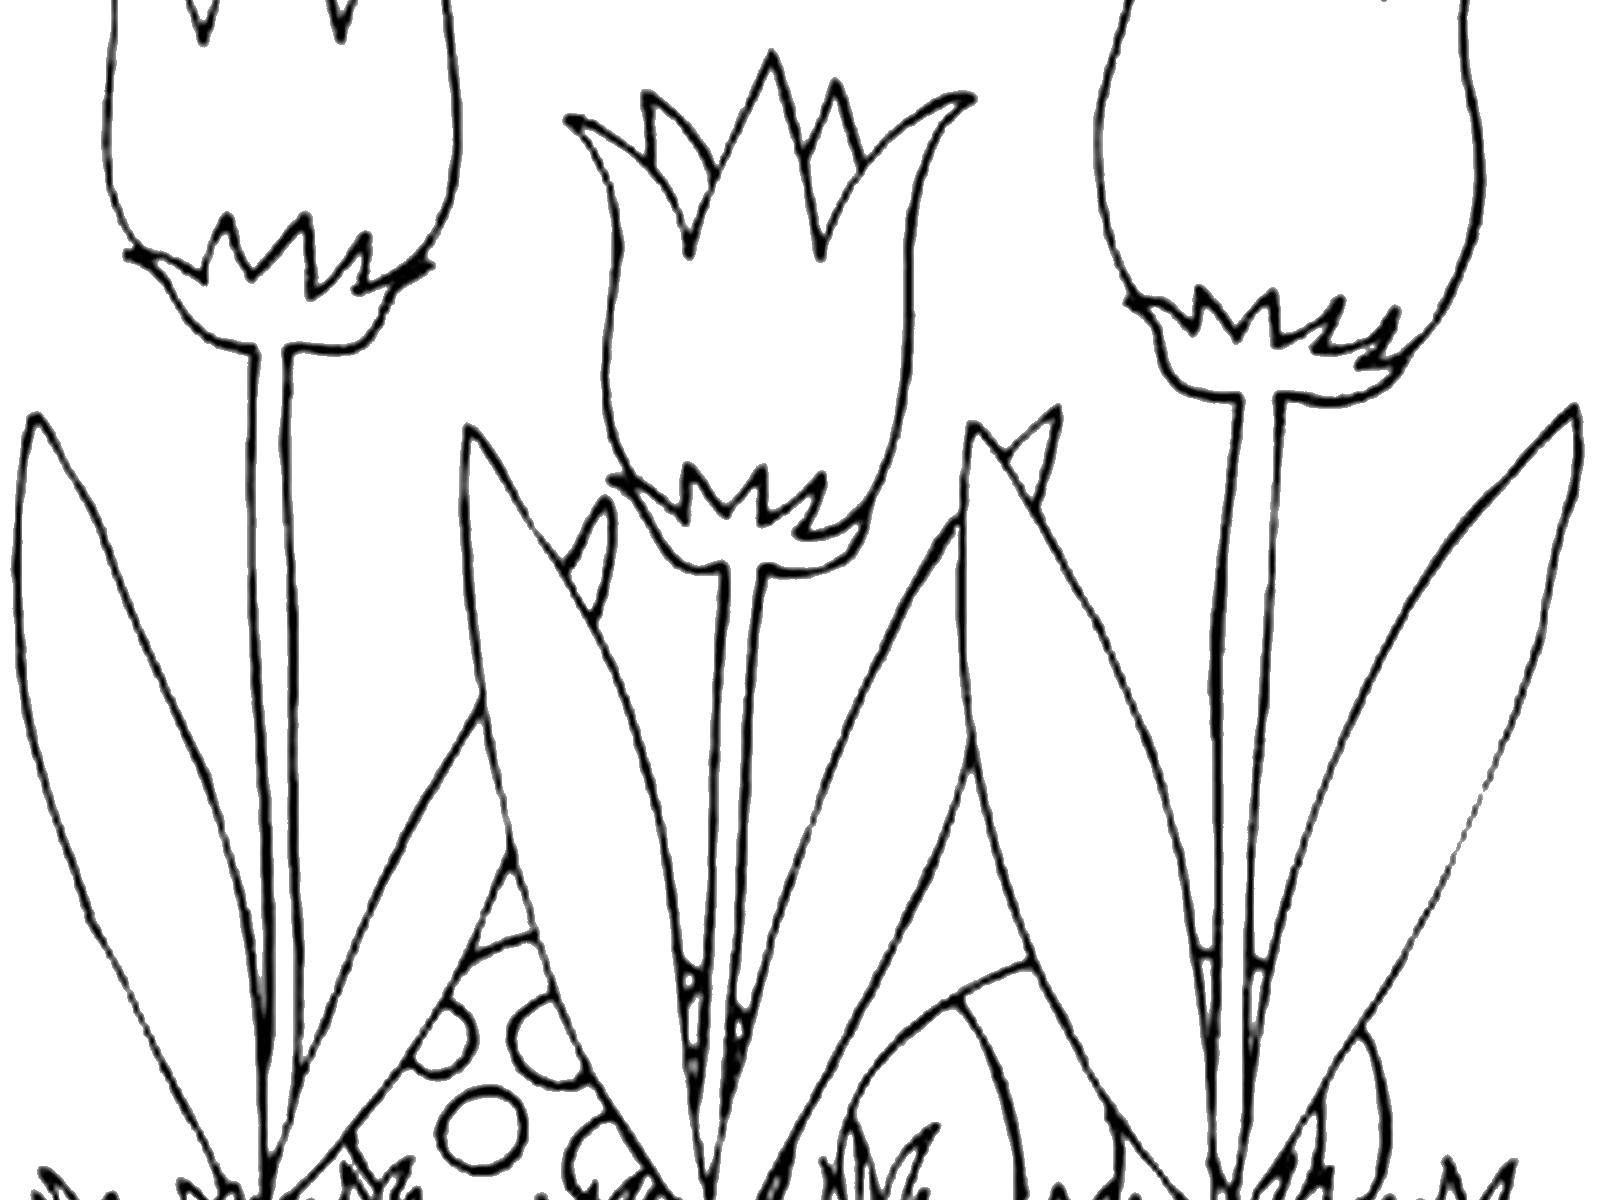 Coloring Three tulips. Category flowers. Tags:  flowers, tulips.